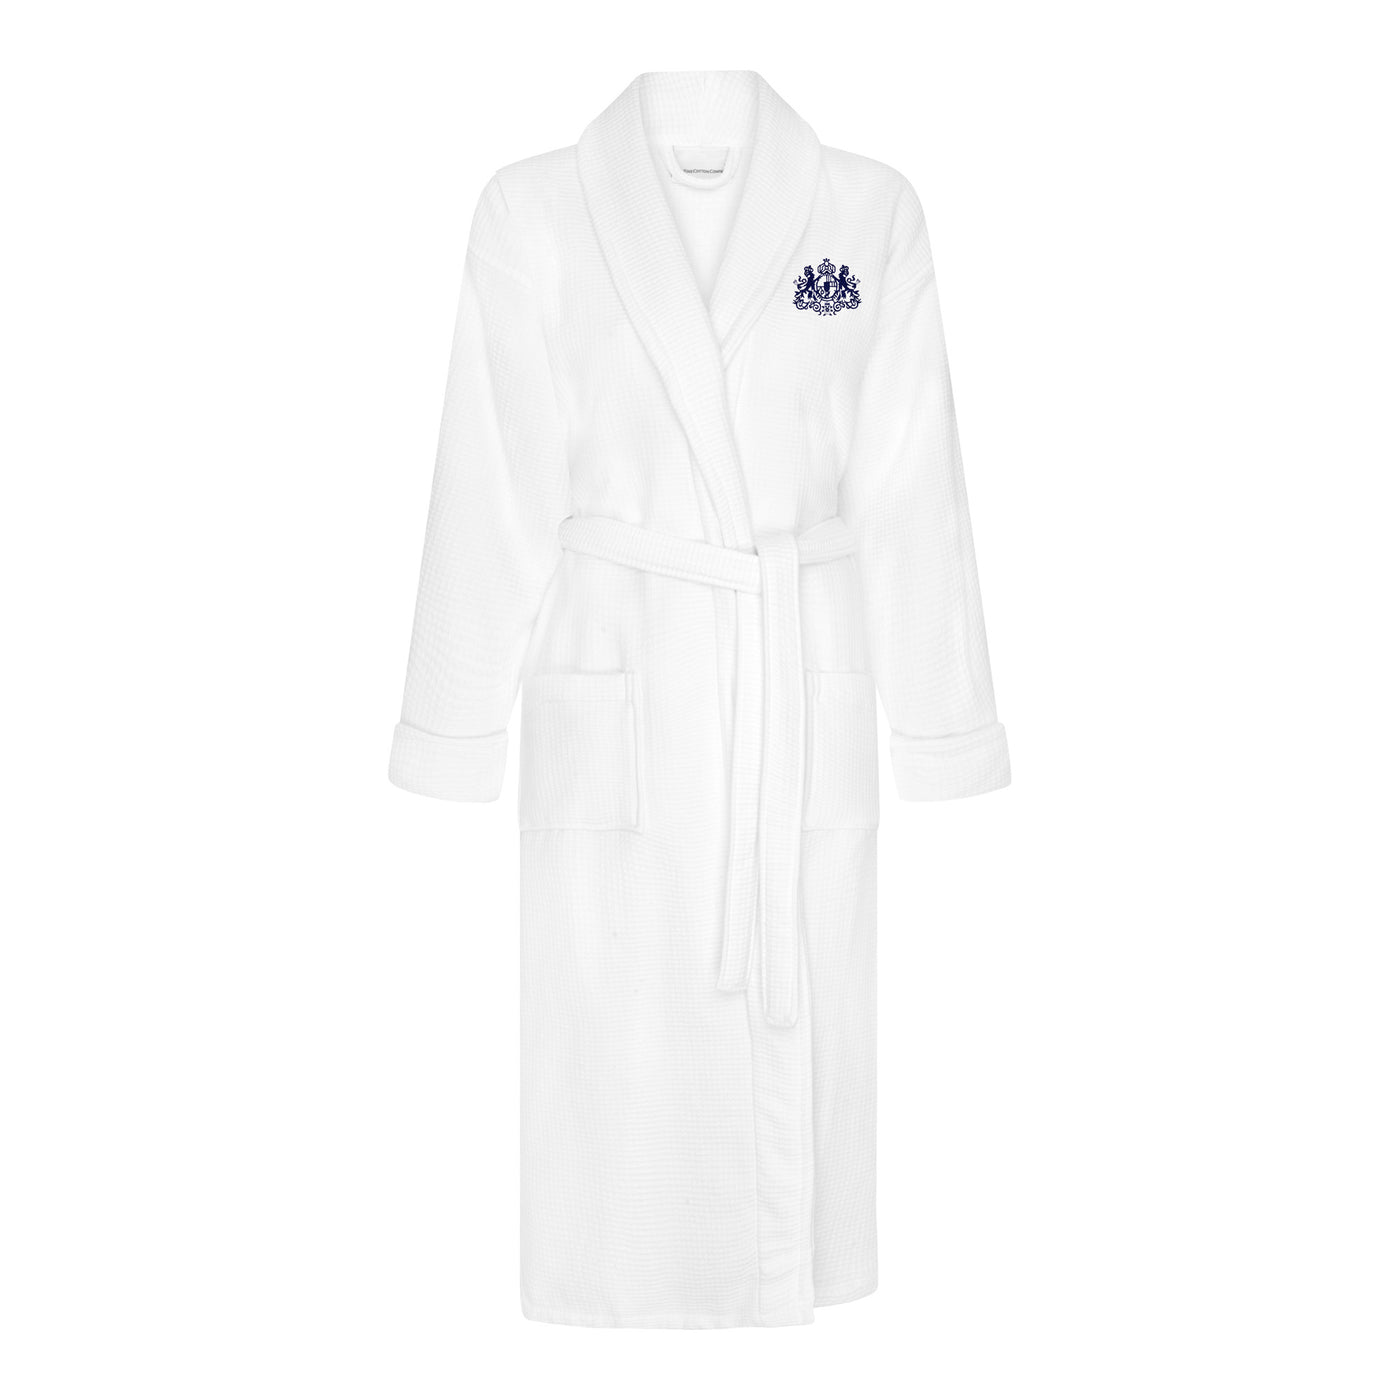 Crest or Motif Embroidered Bath Robe Collection